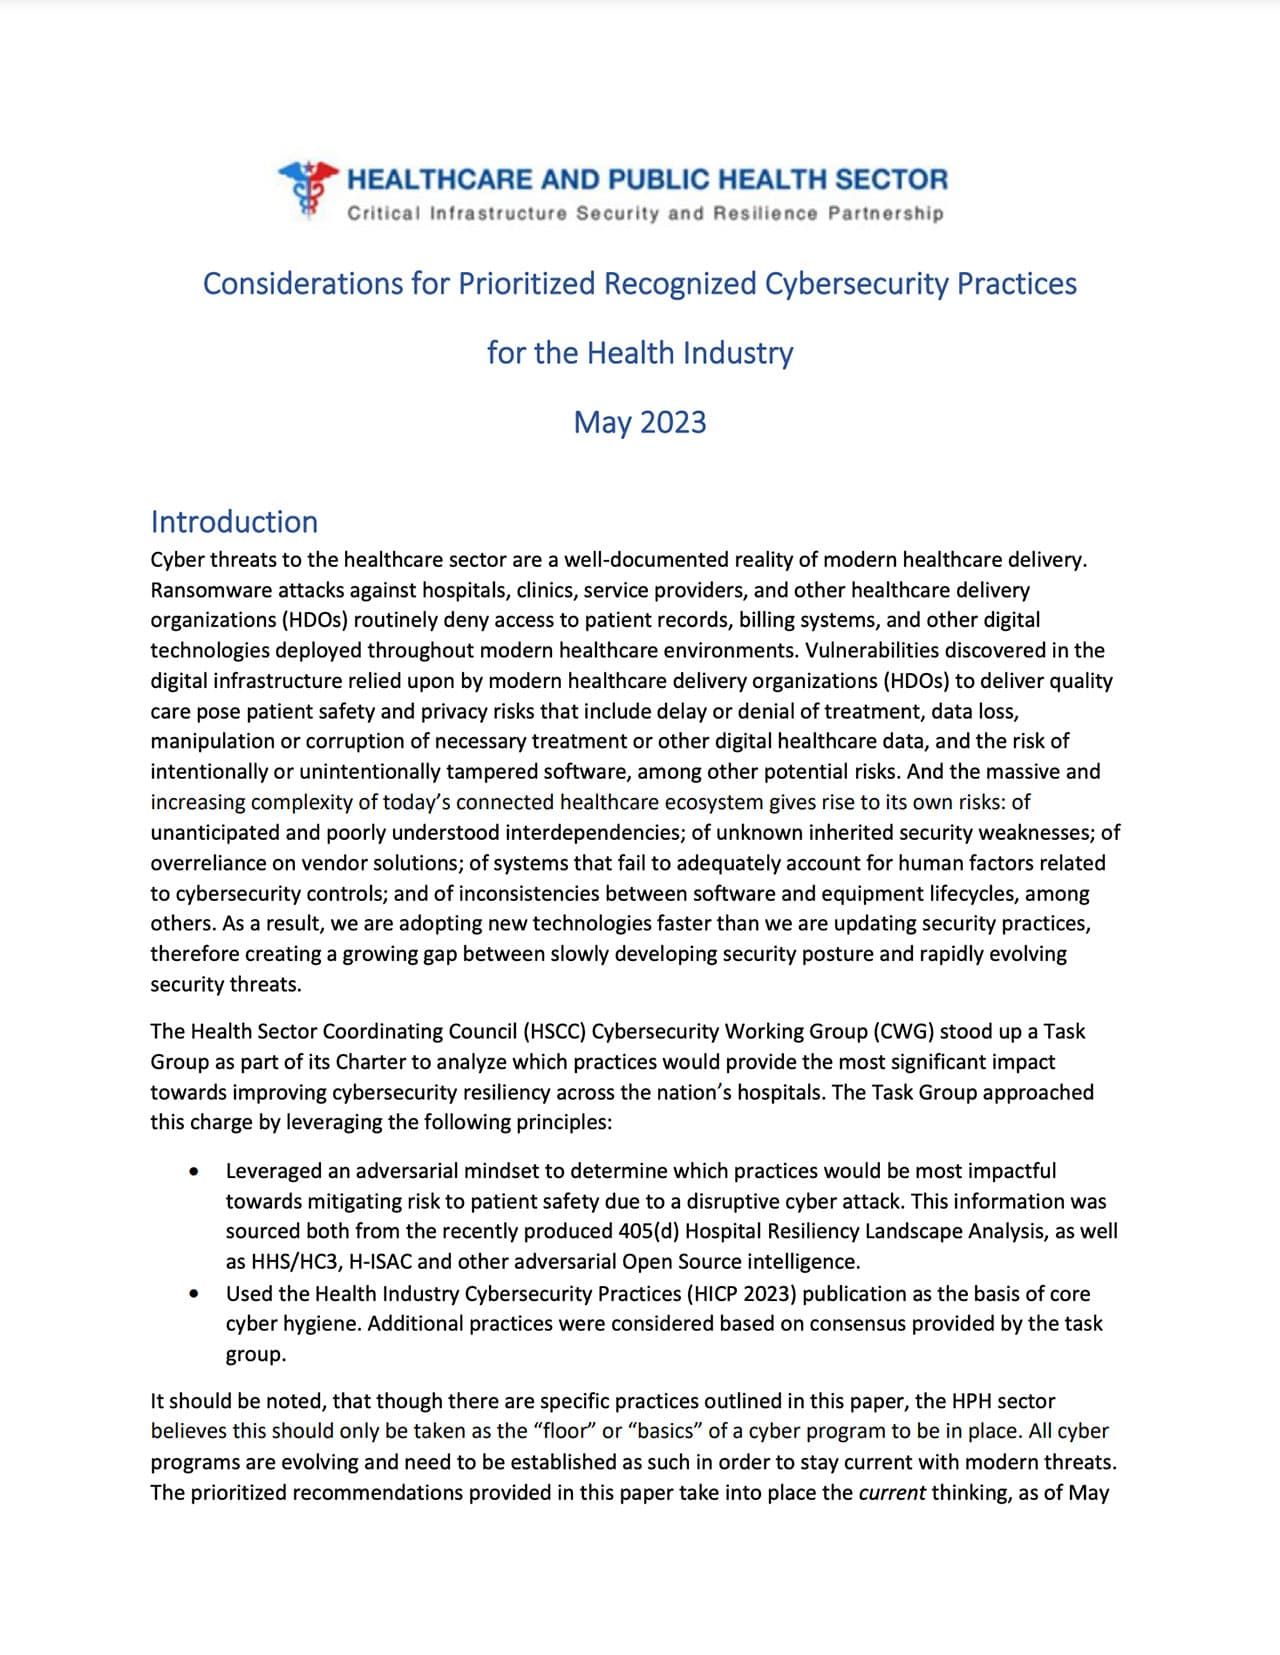 Prioritized Recognized Cybersecurity Practices